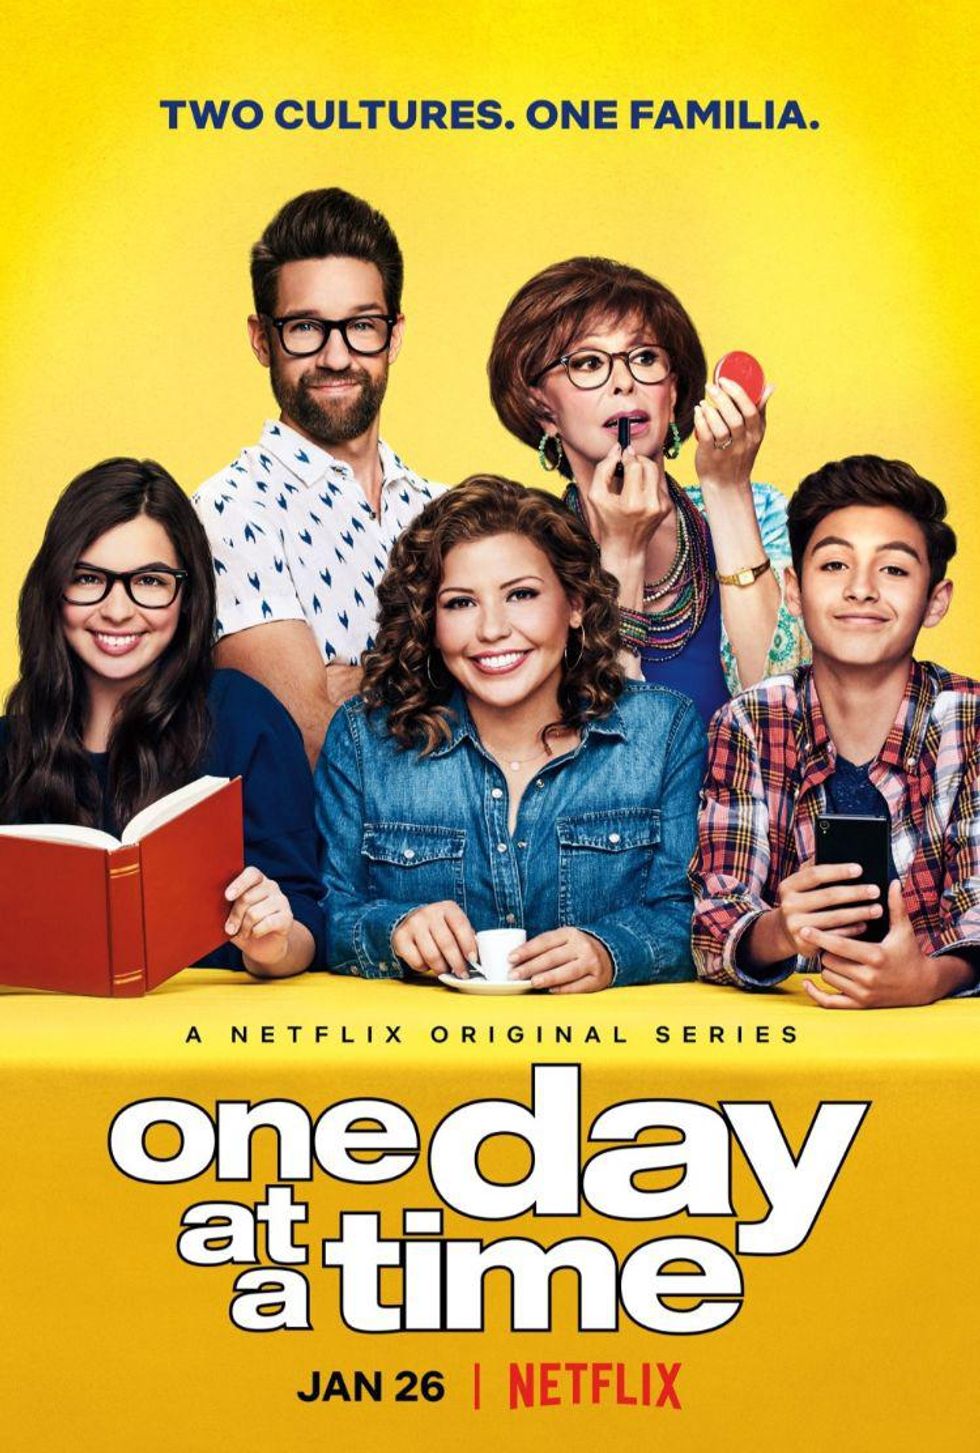 Here's When 'One Day at a Time' Season 4 Will Premiere